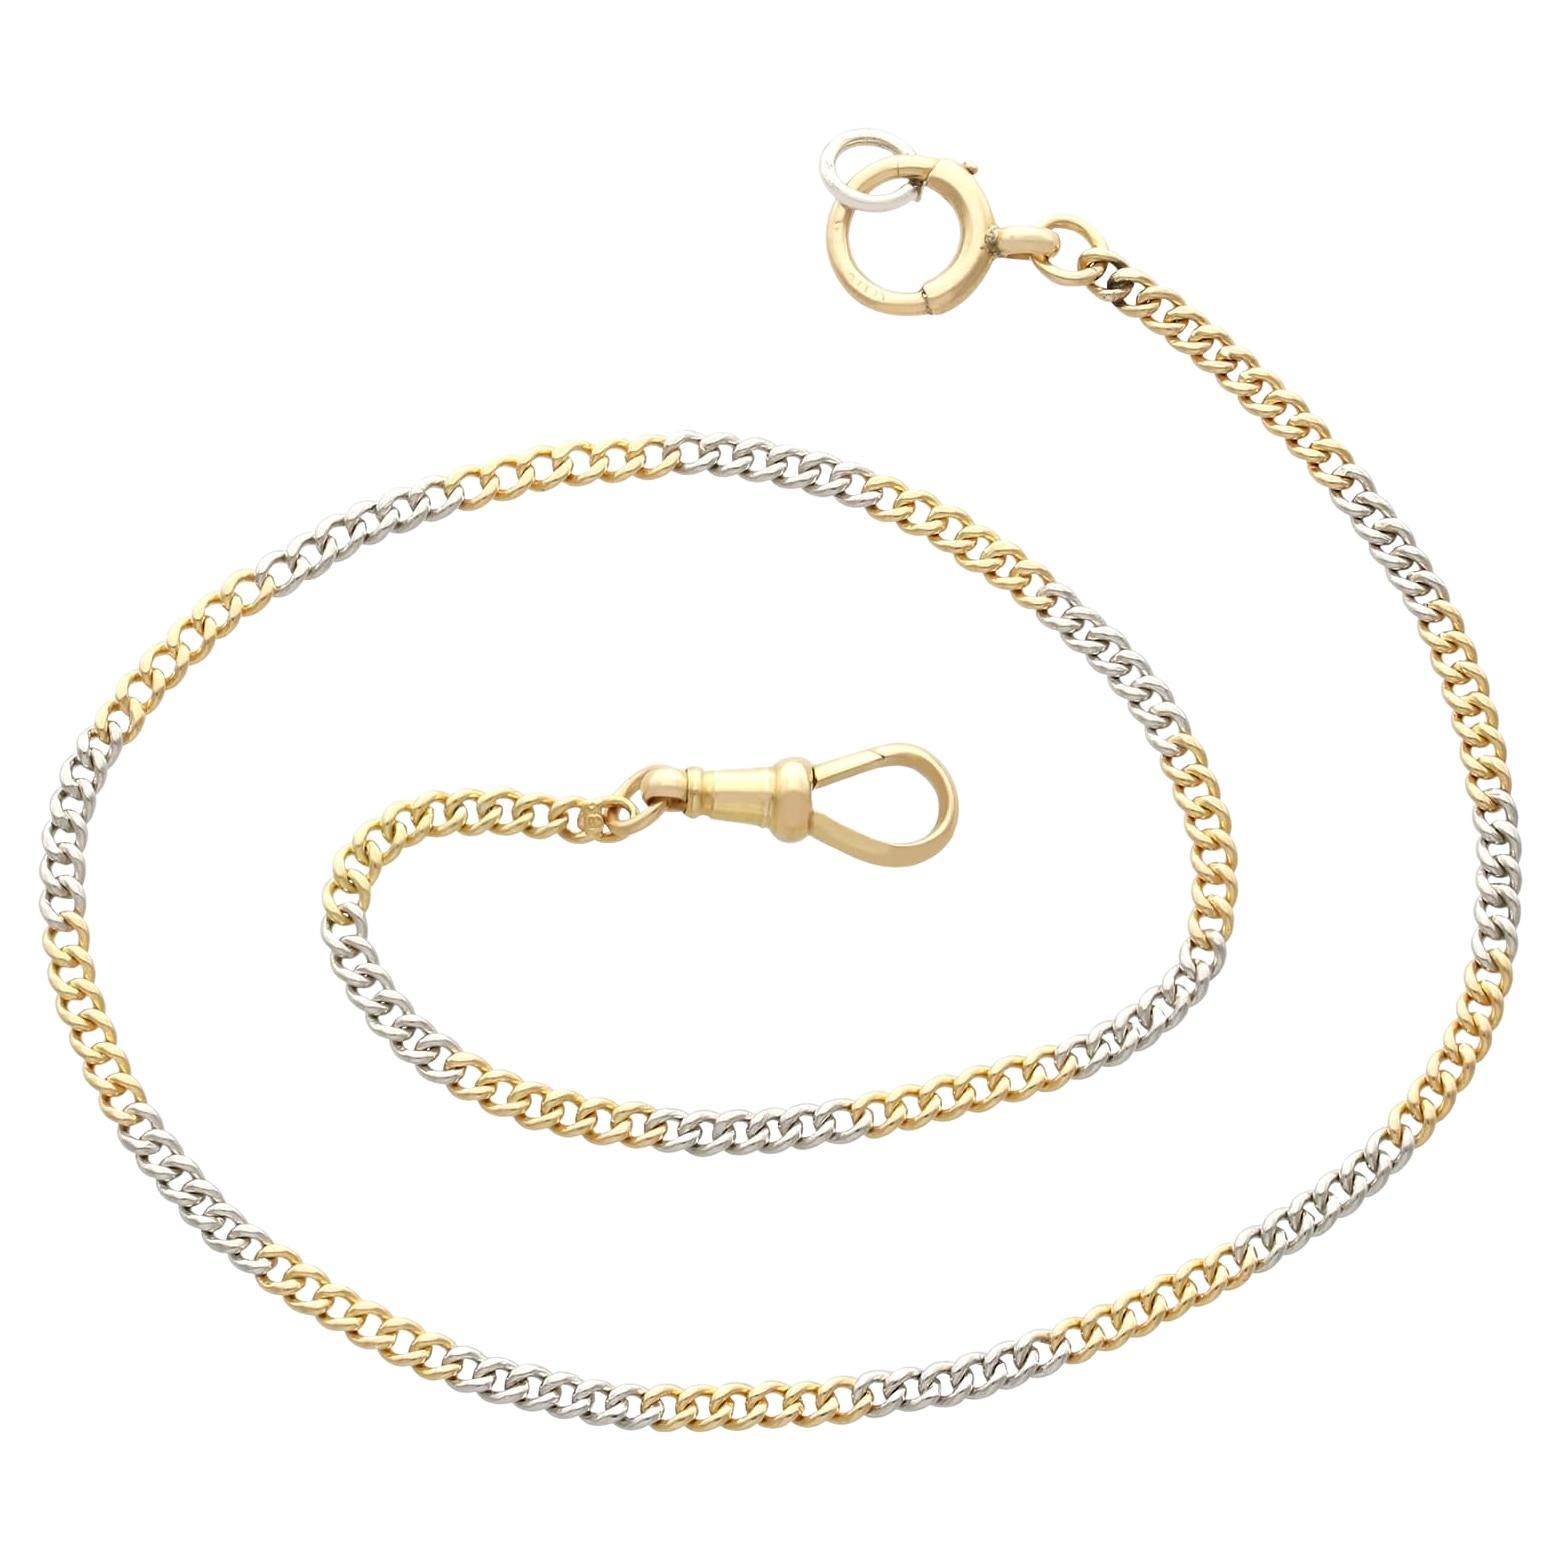 Antique 18k Yellow Gold and Platinum Ladies Fob Watch Chain Circa 1910 For Sale